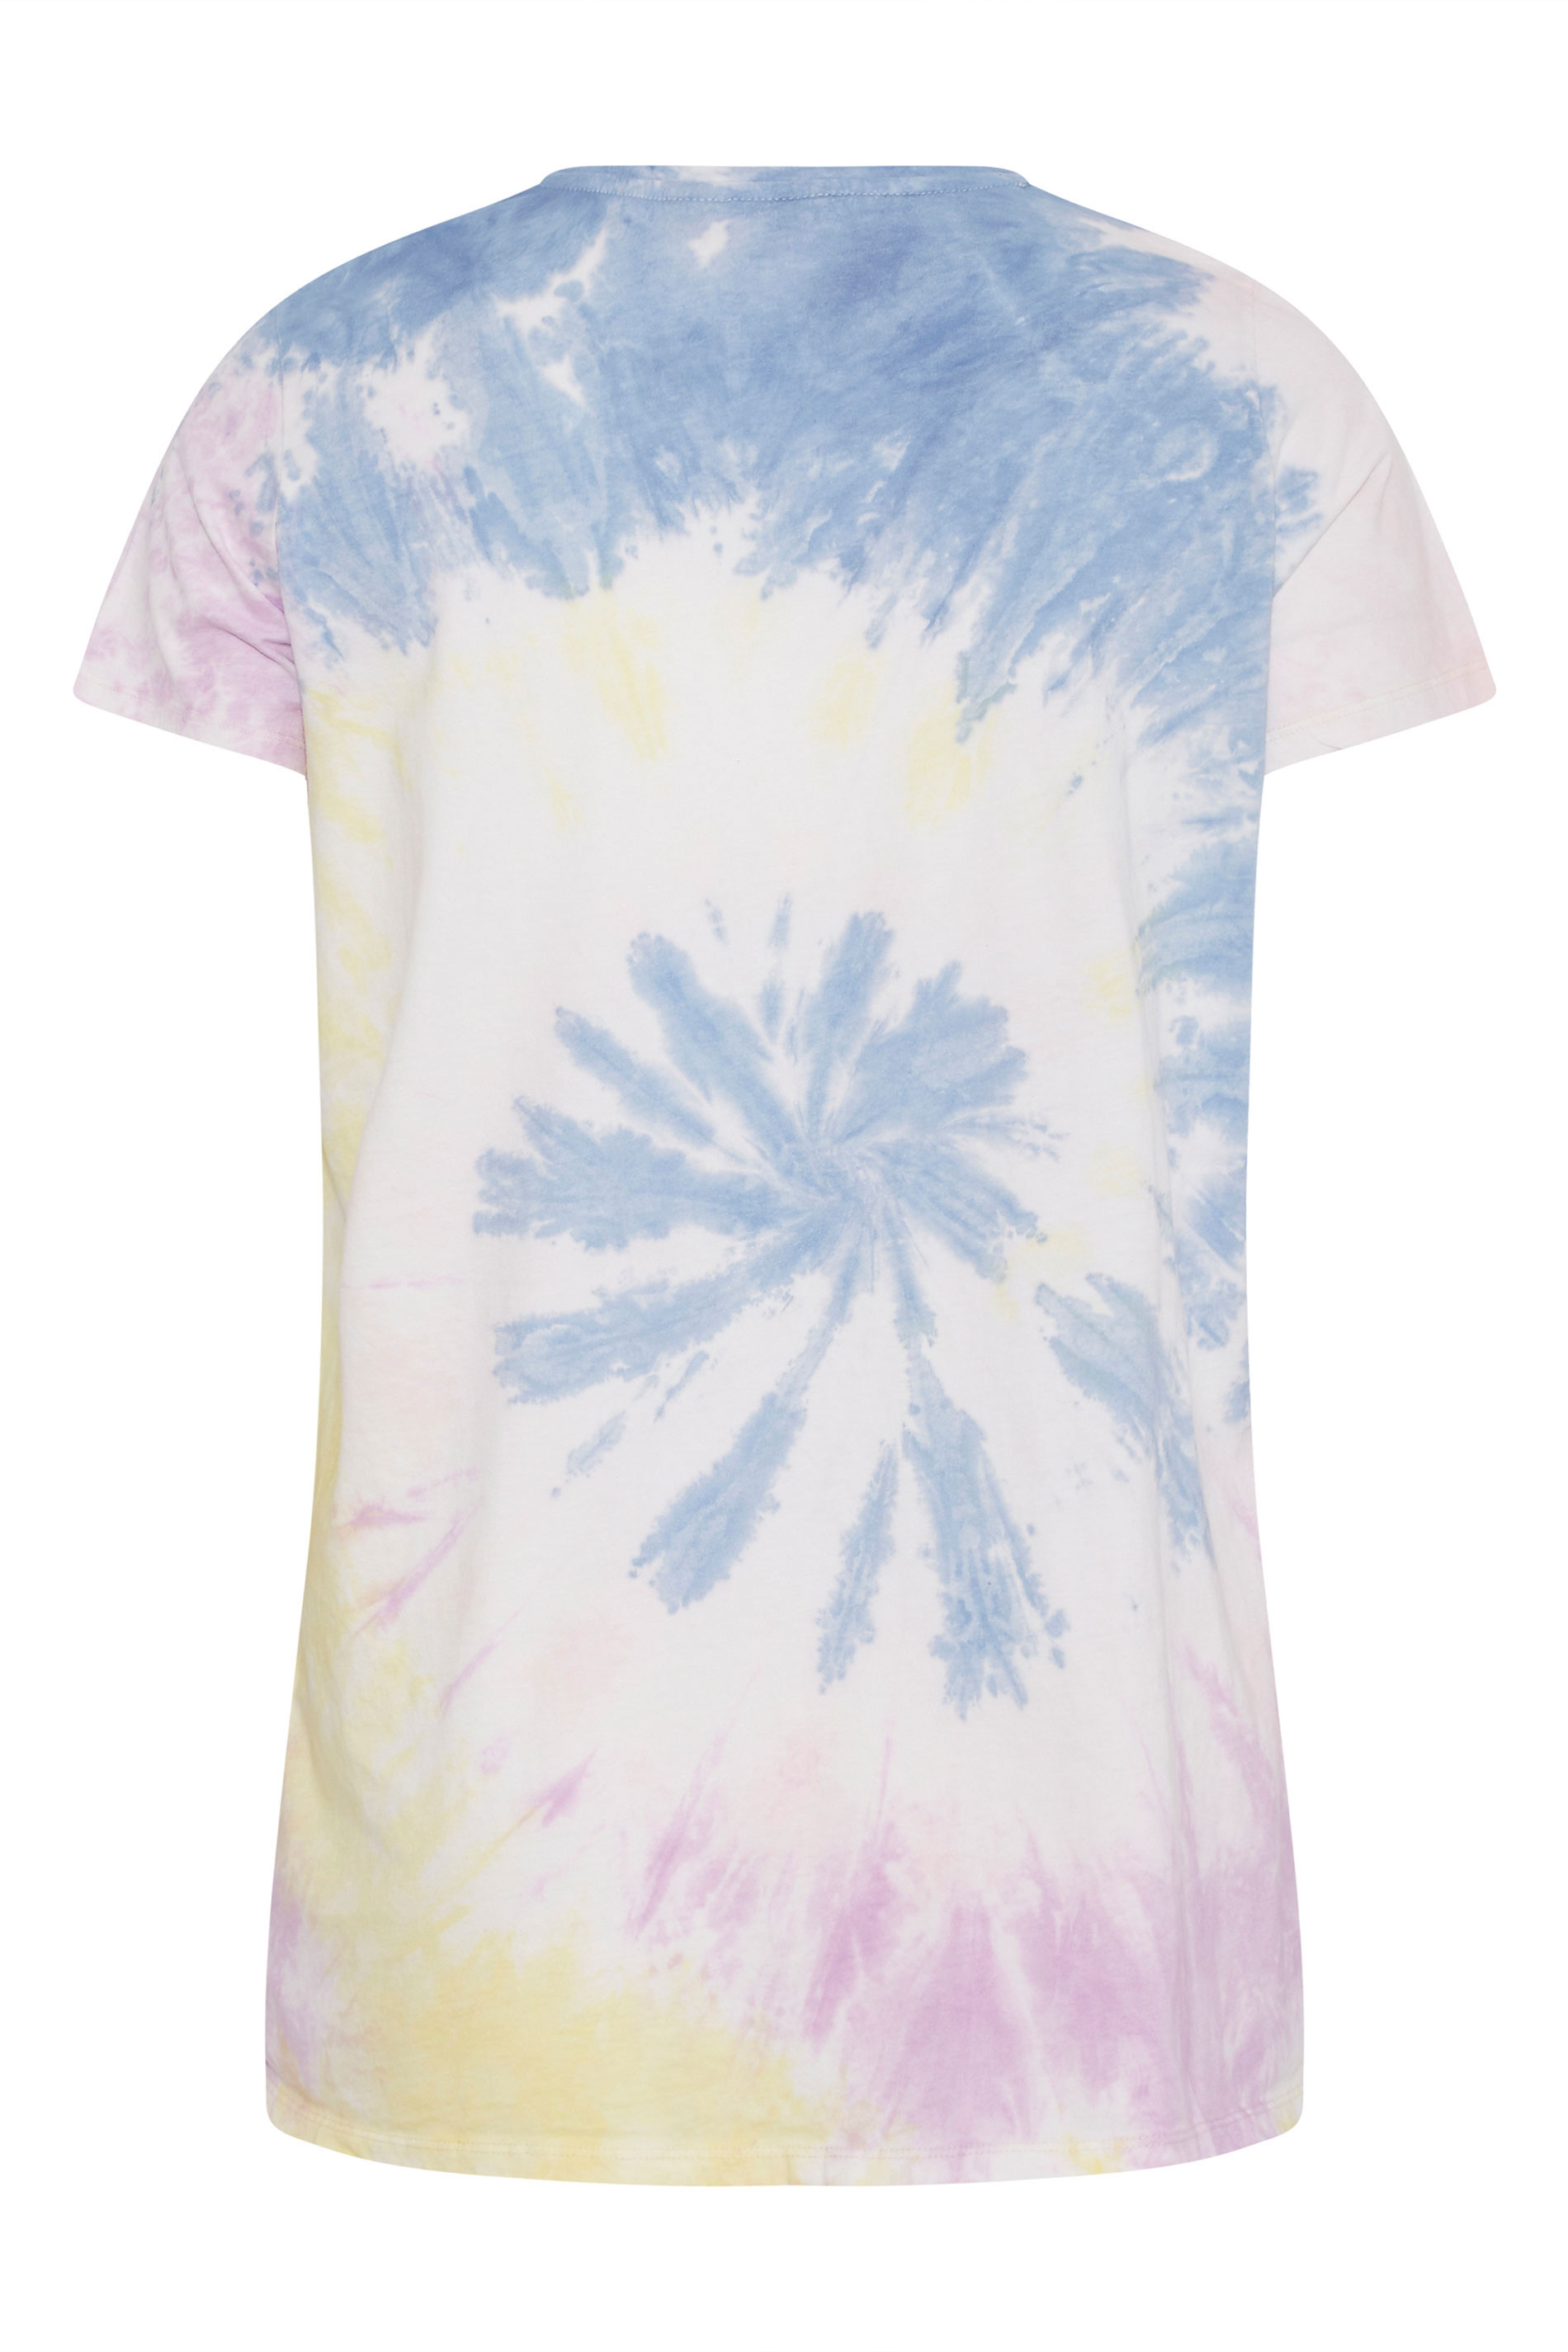 Grande taille  Tops Grande taille  Tops à Slogans | T-Shirt Blanc Tie & Dye 'Believe in Yourself' - ZD98512